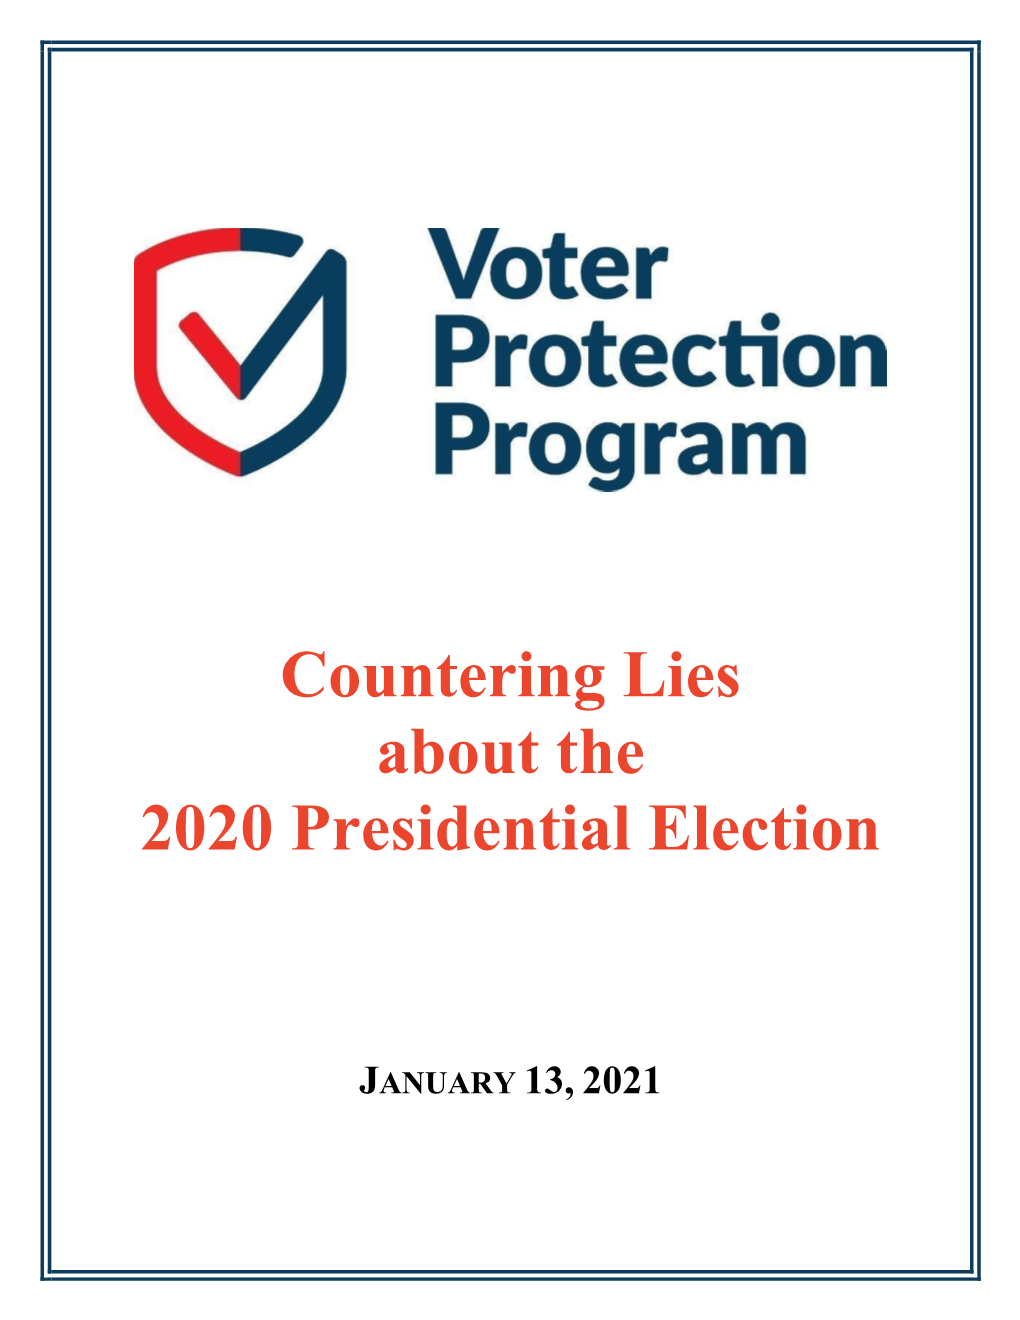 Countering Lies About the 2020 Presidential Election